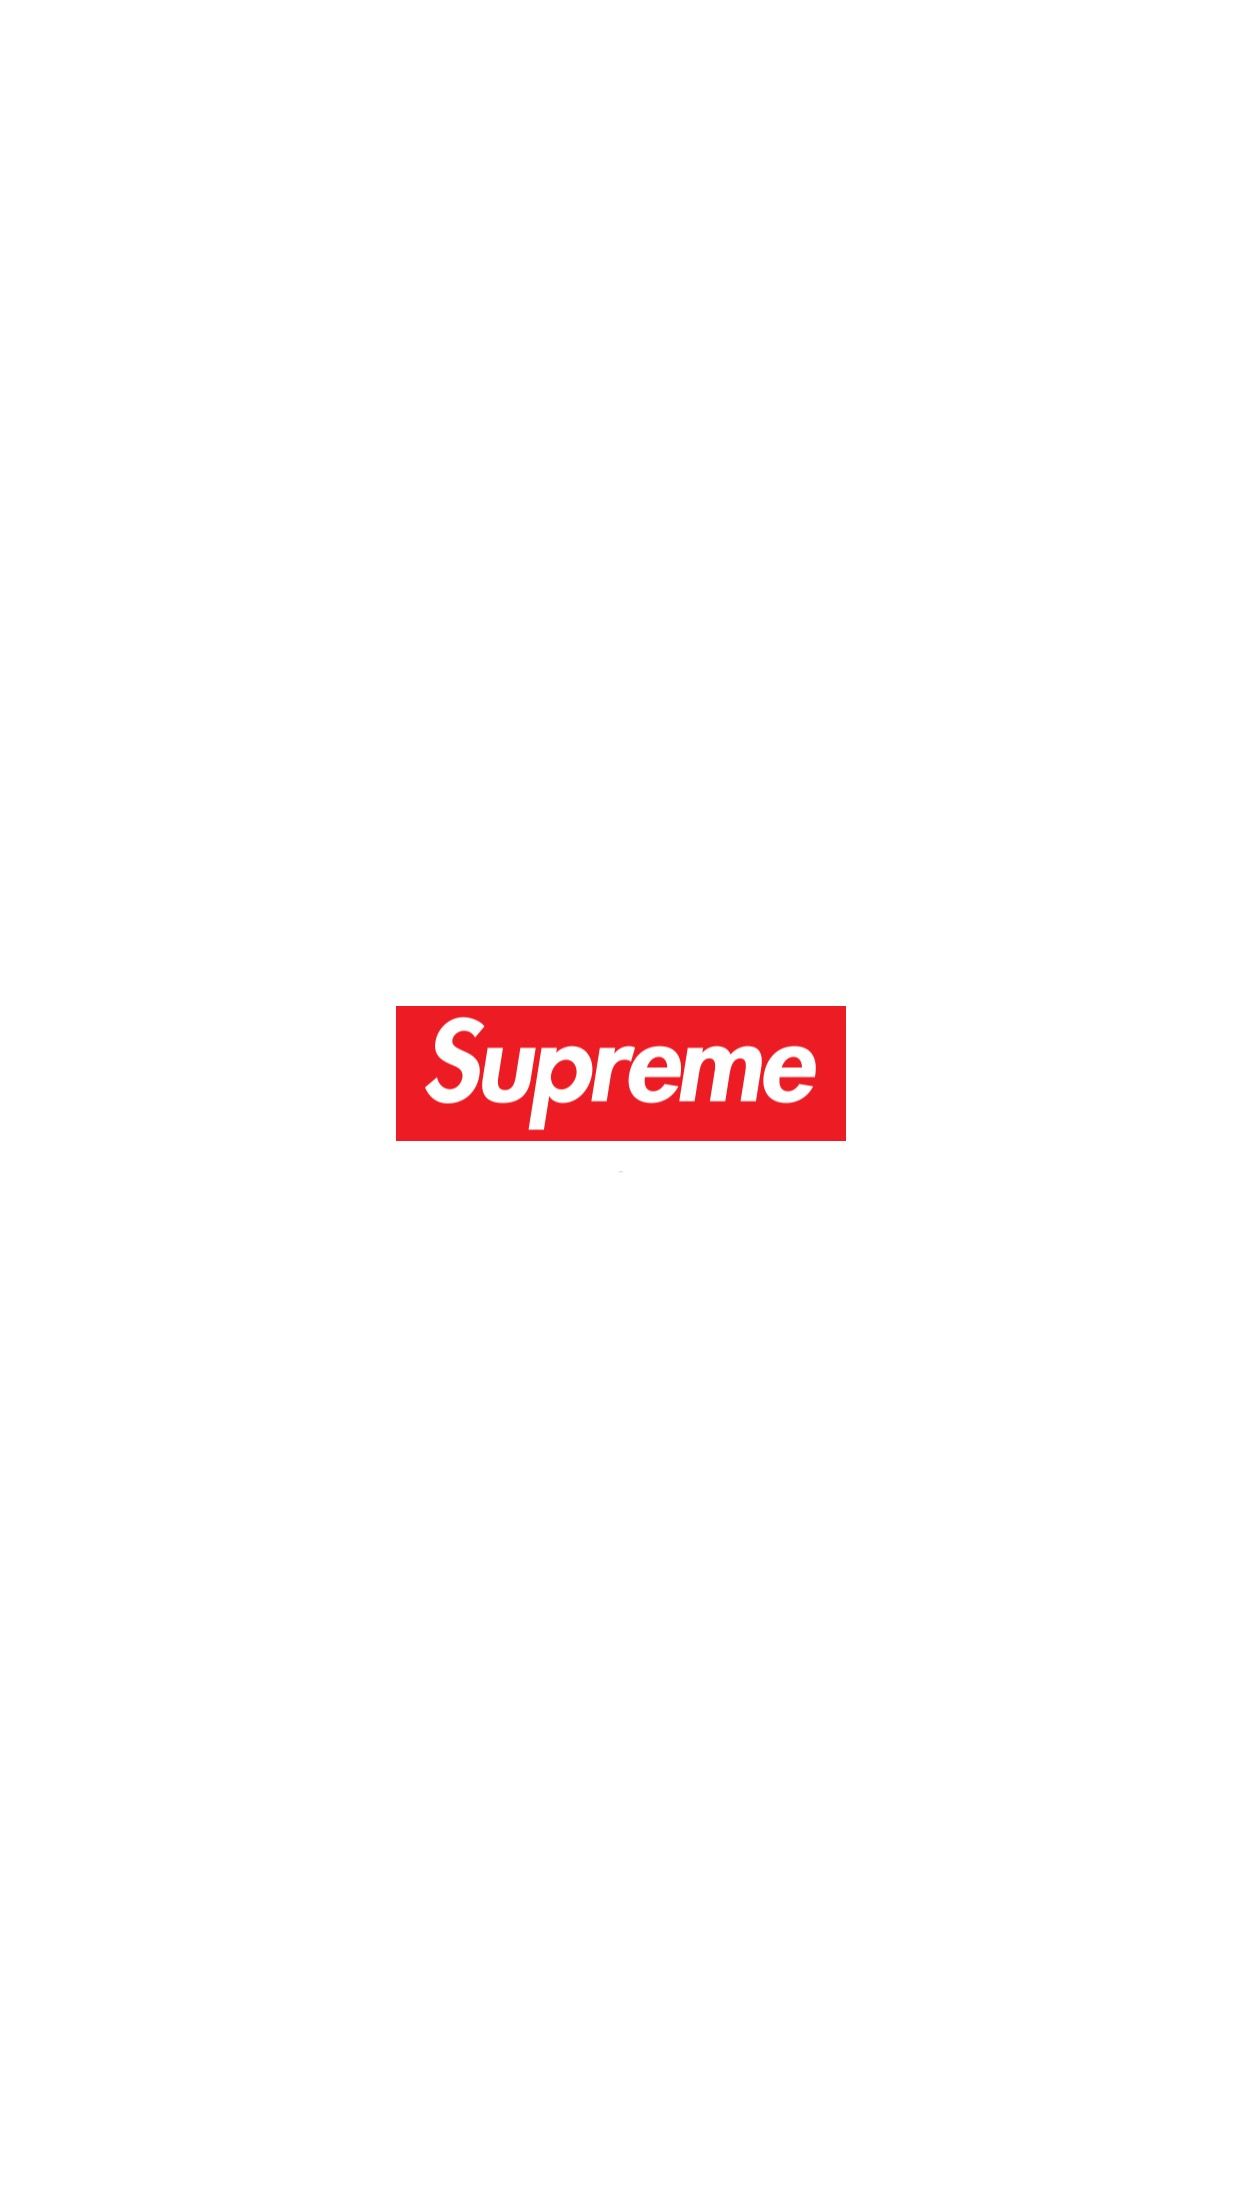 Obey Supreme iPhone Wallpaper Top